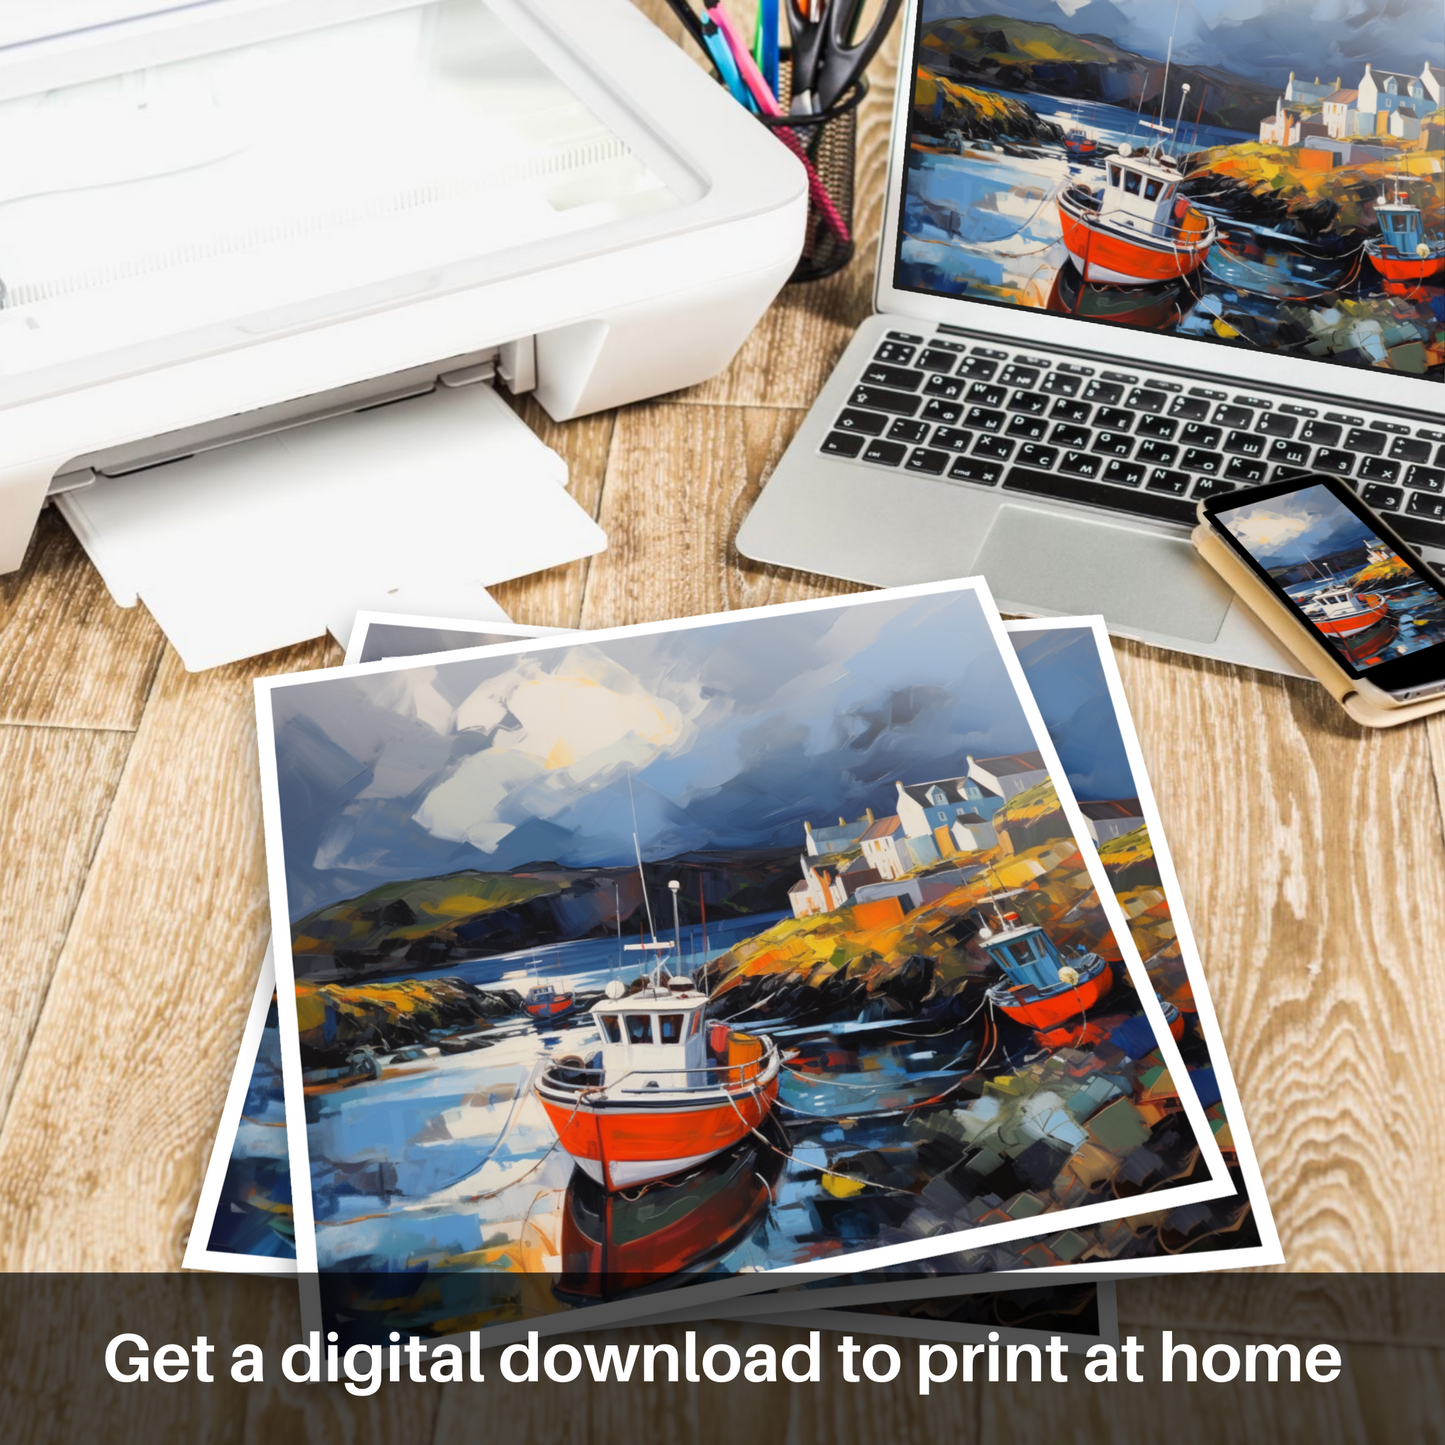 Downloadable and printable picture of Castlebay Harbour with a stormy sky